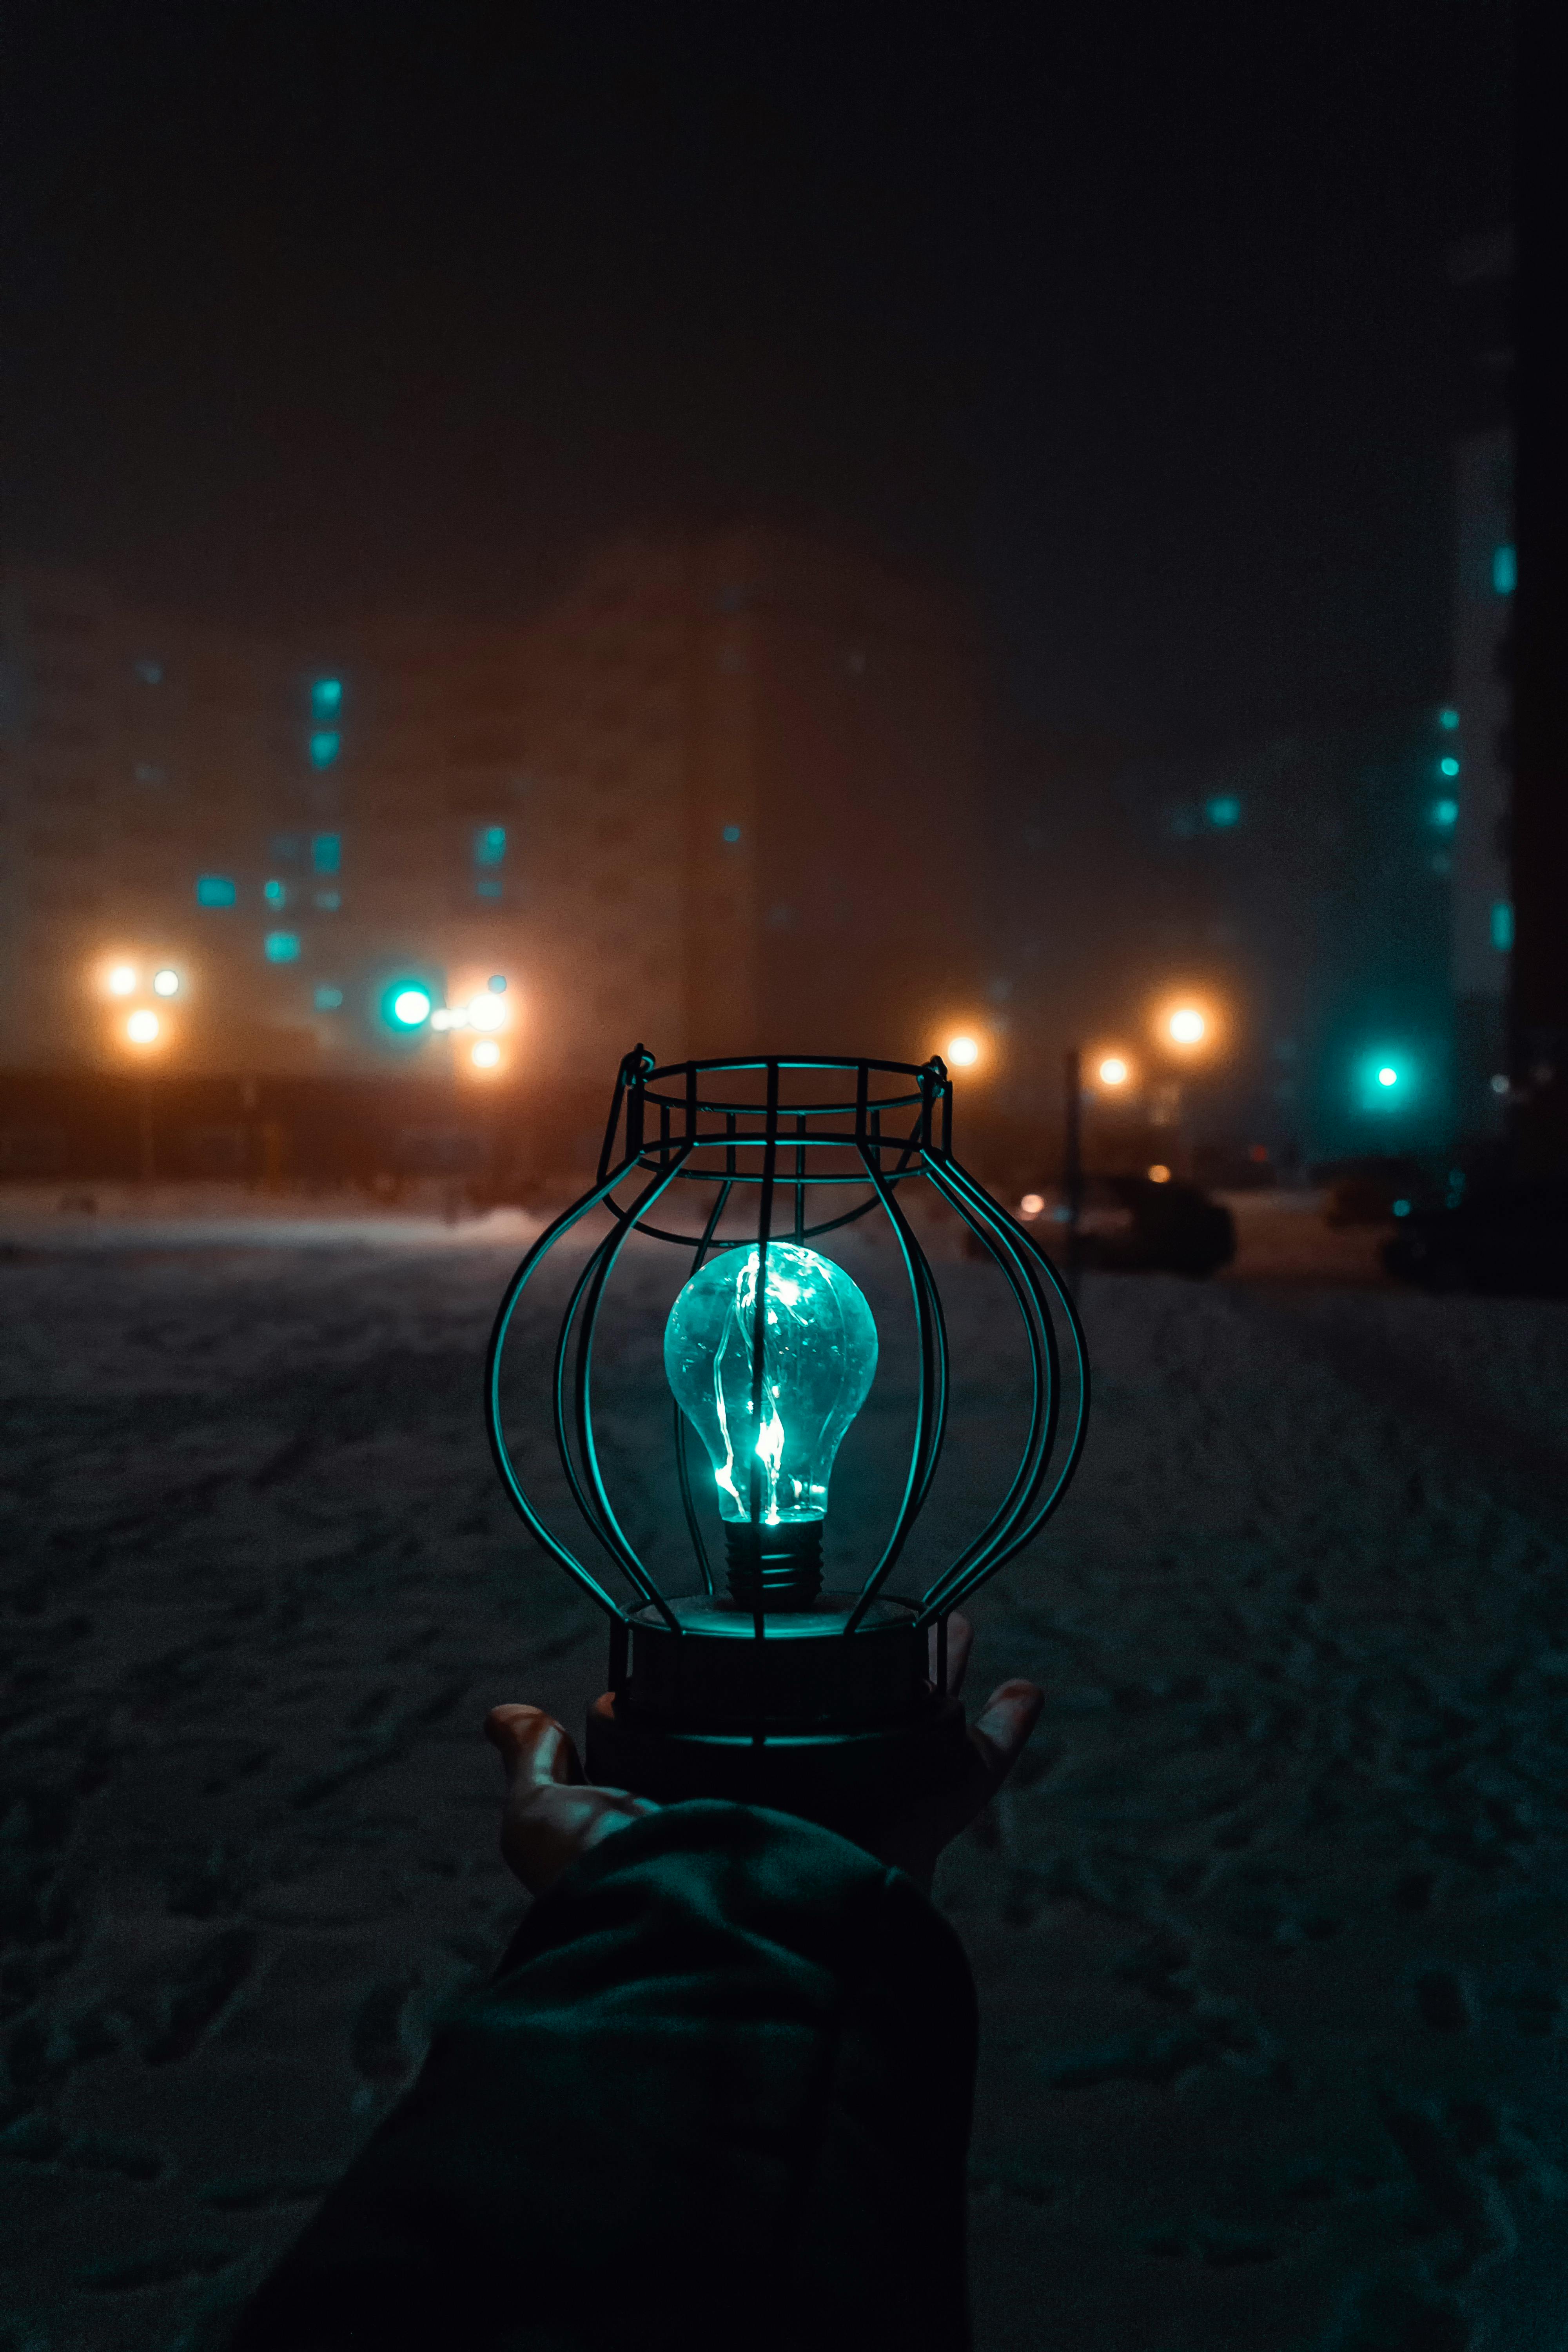 Person Holding Turned-on Light during Nighttime · Free Stock Photo